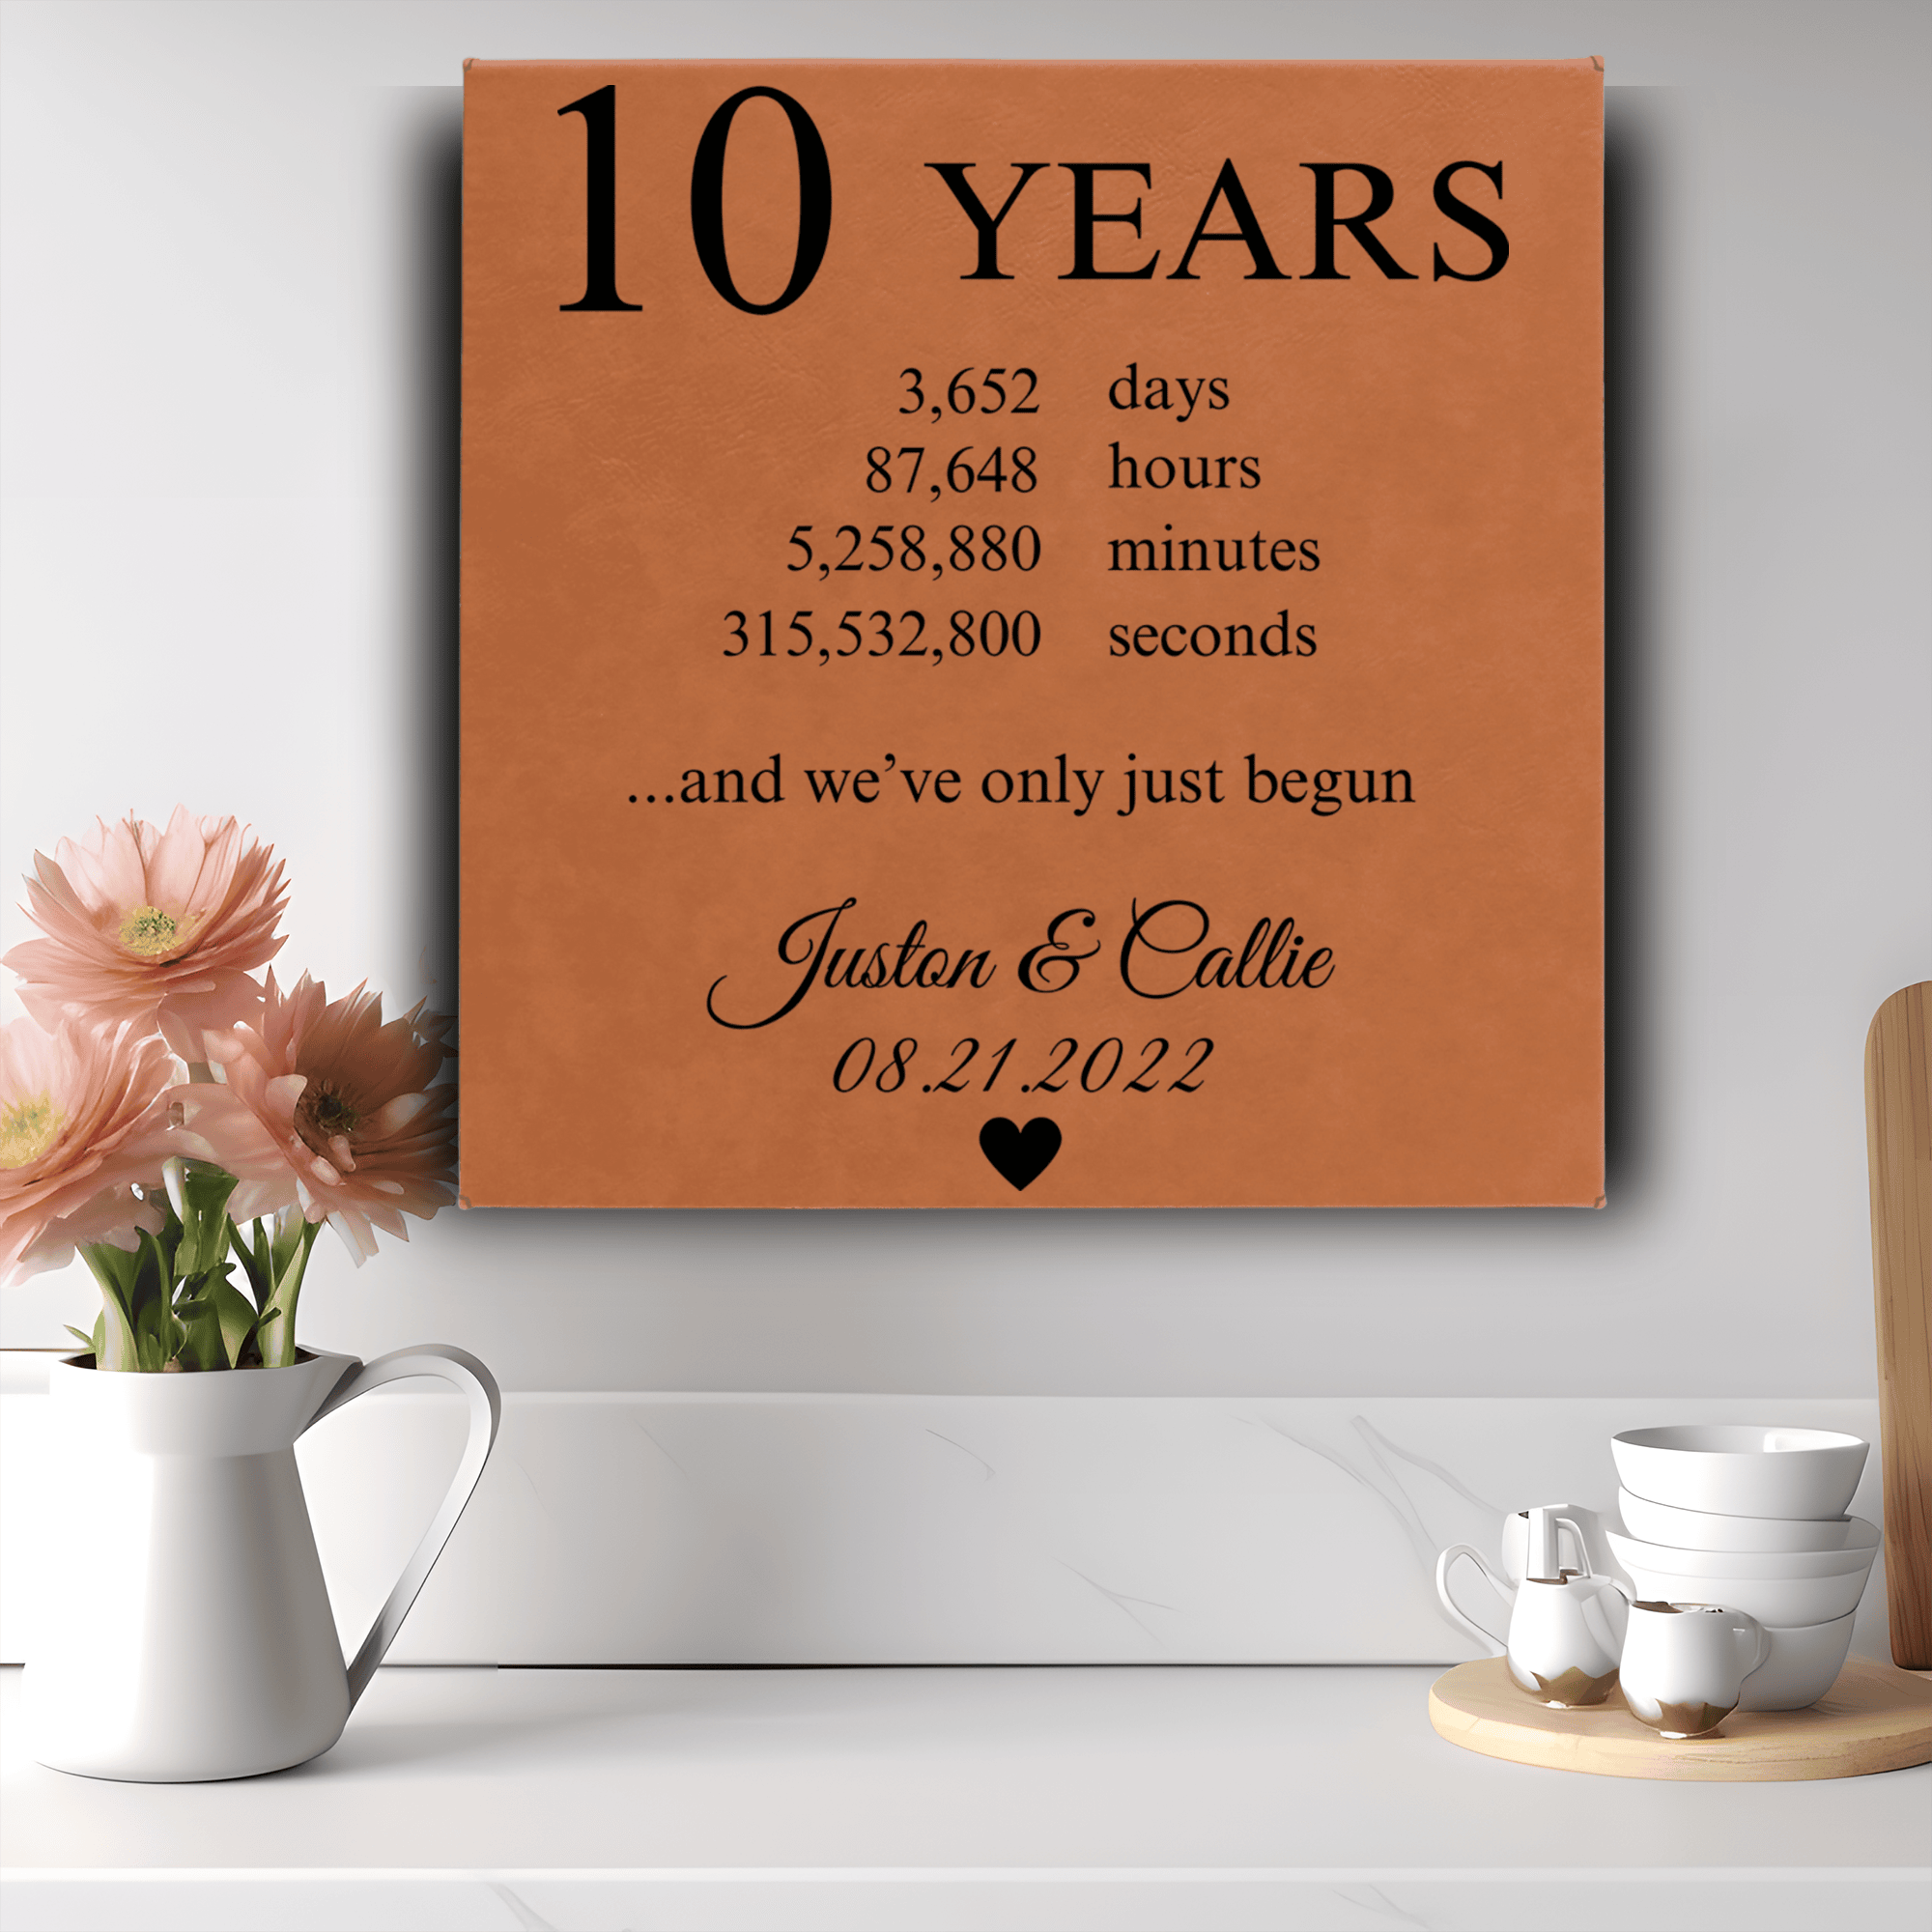 Rawhide Leather Wall Decor With 10 Year Anniversary Design